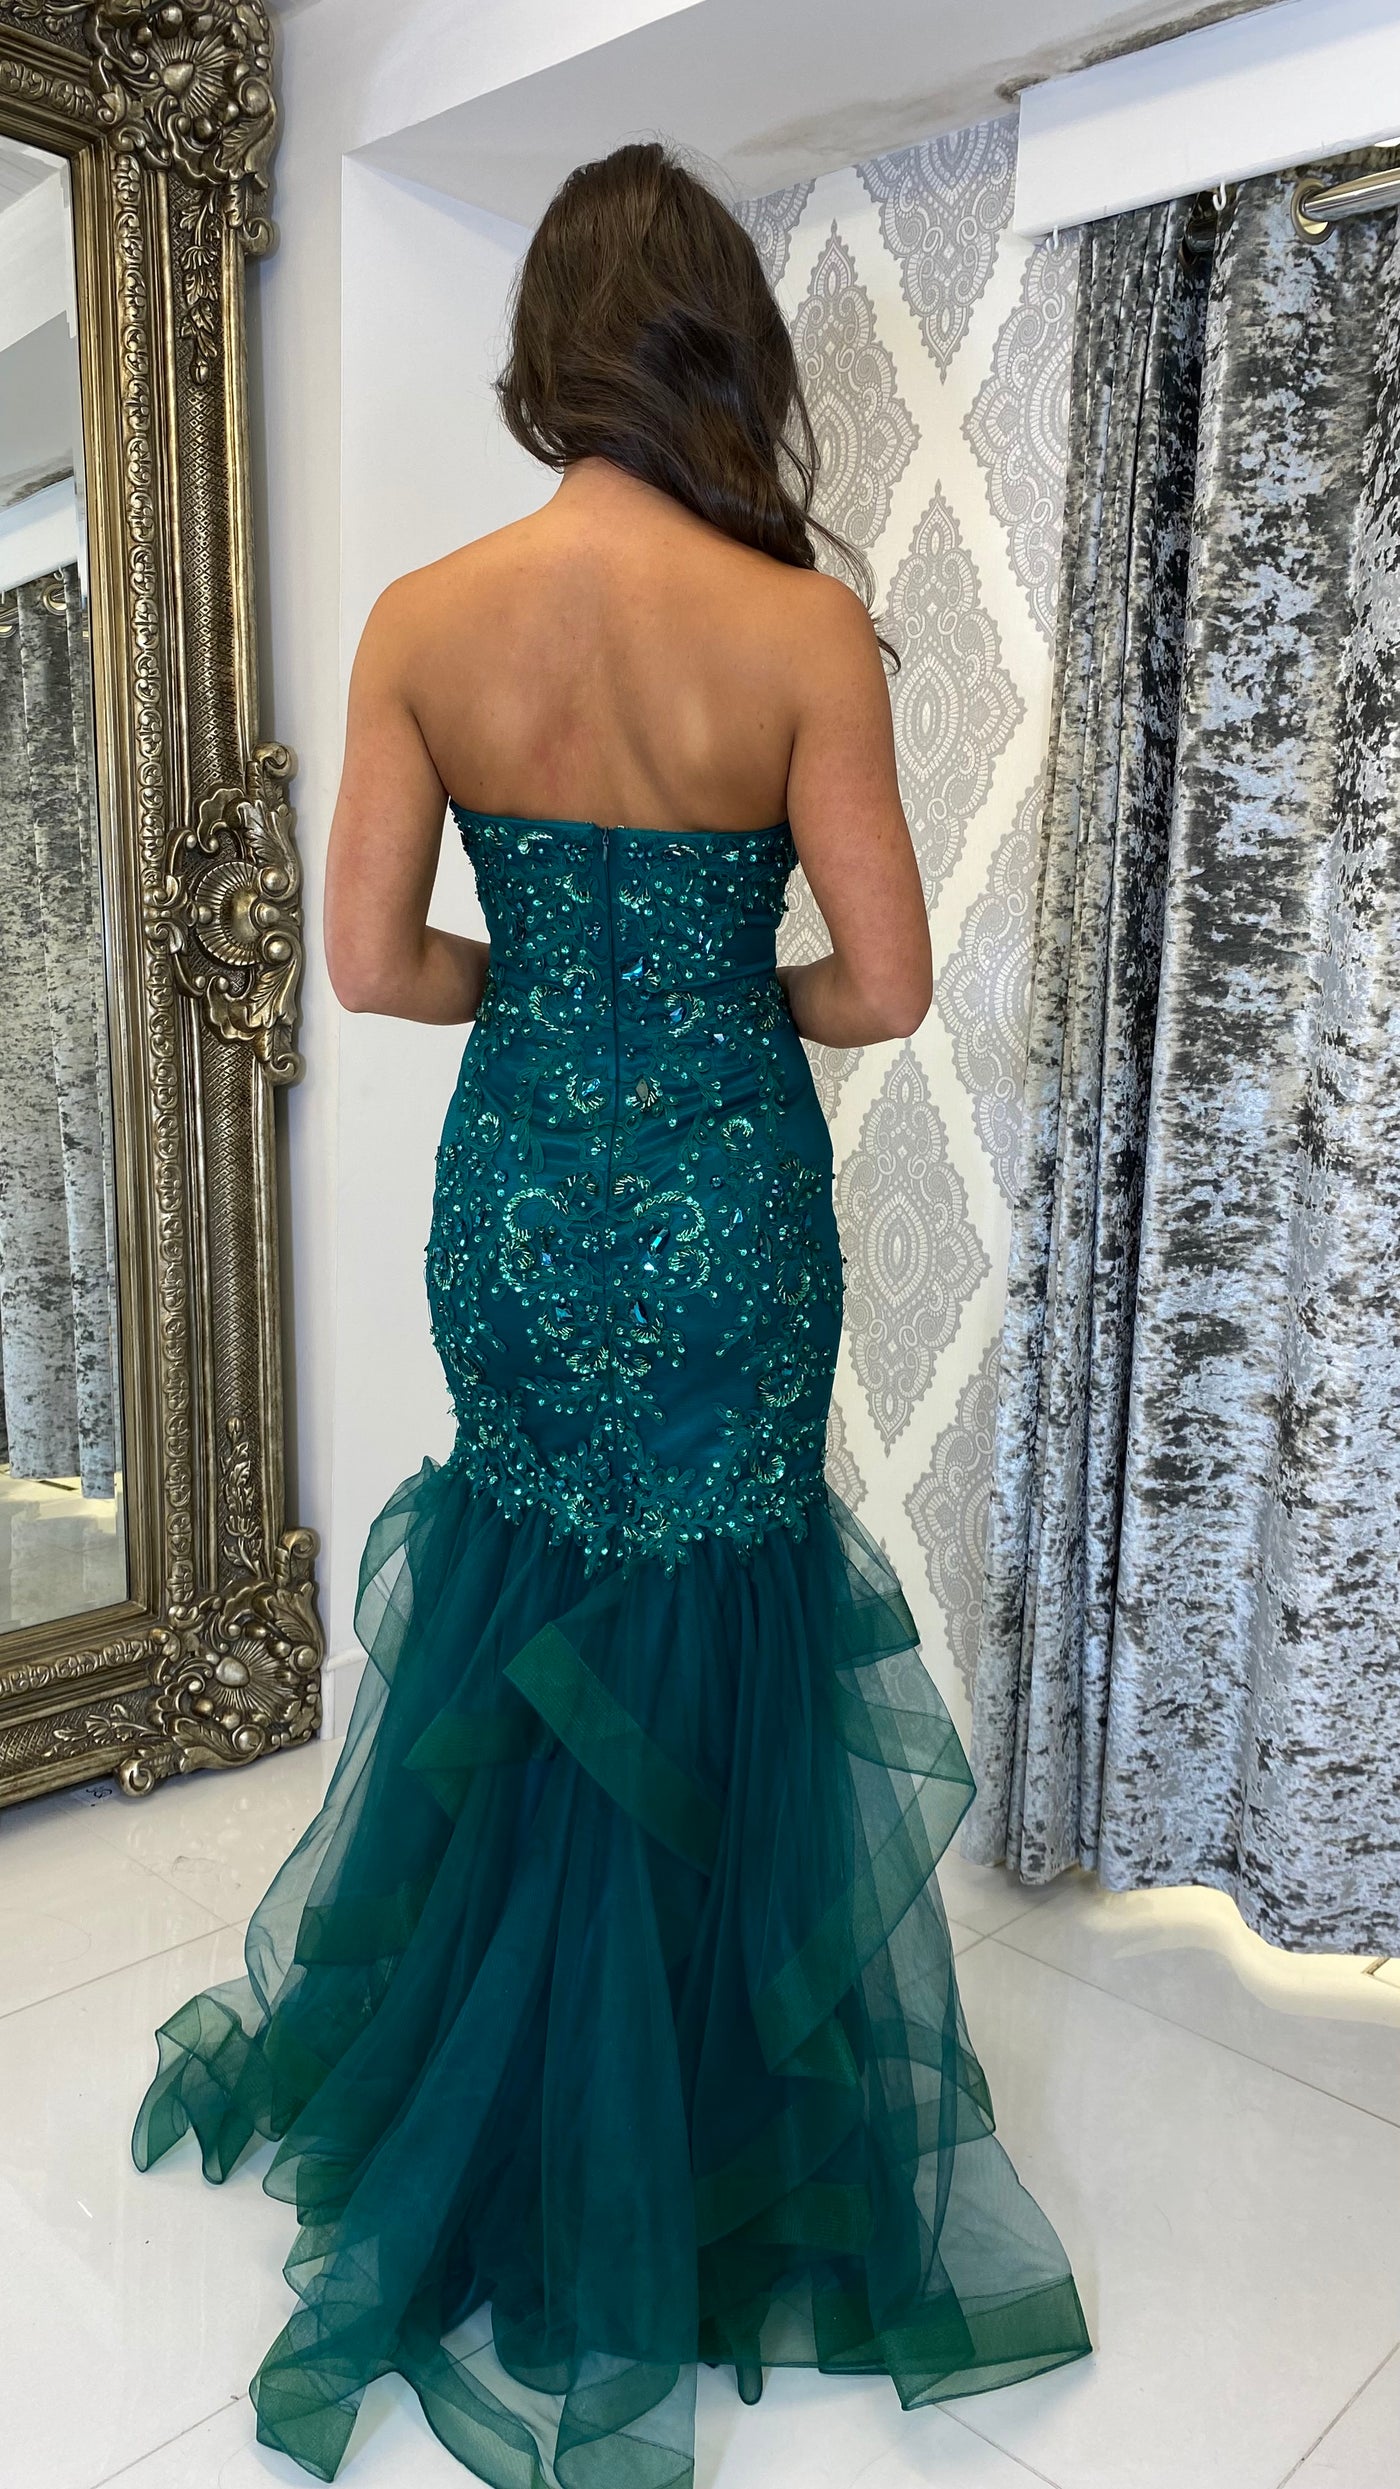 Emerald Green Strapless Jeweled Fishtail Full Length Gown